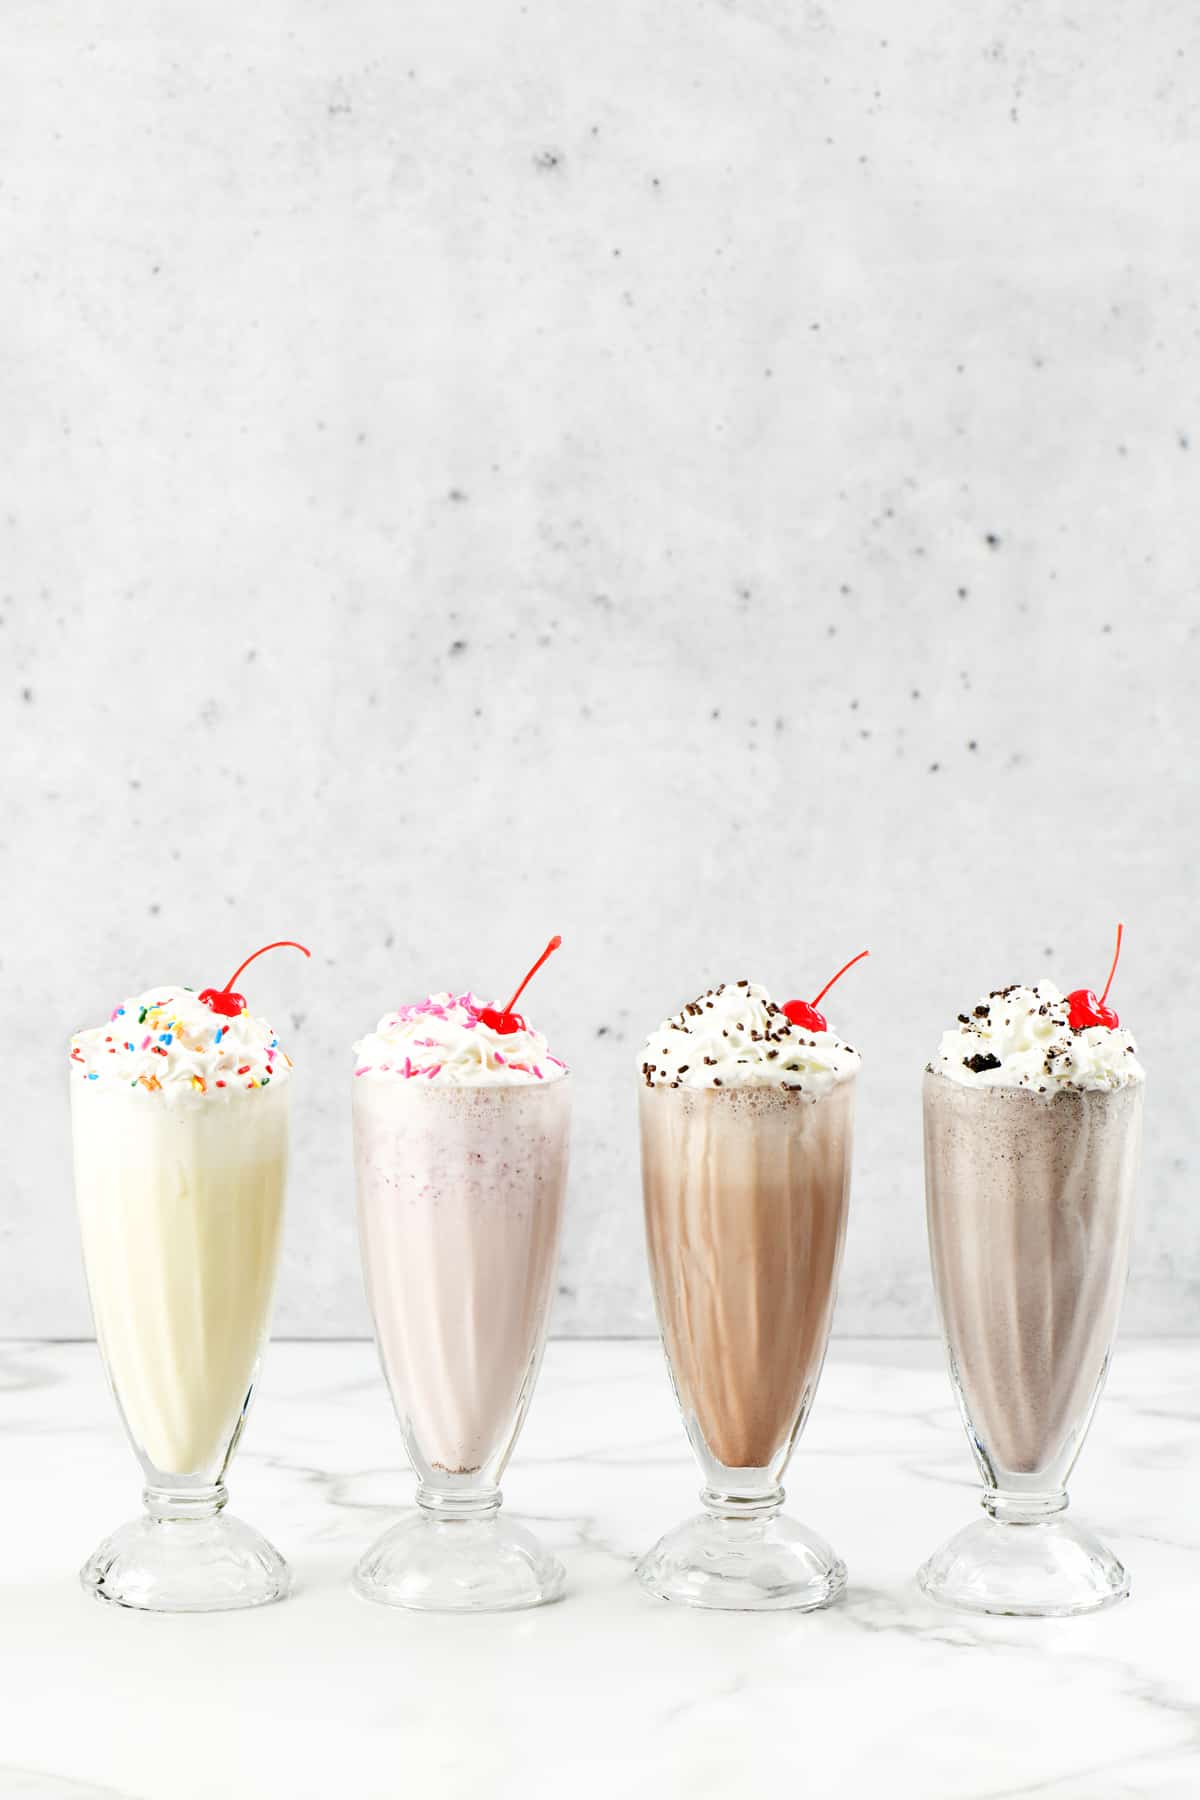 Milkshakes lined up in a row.